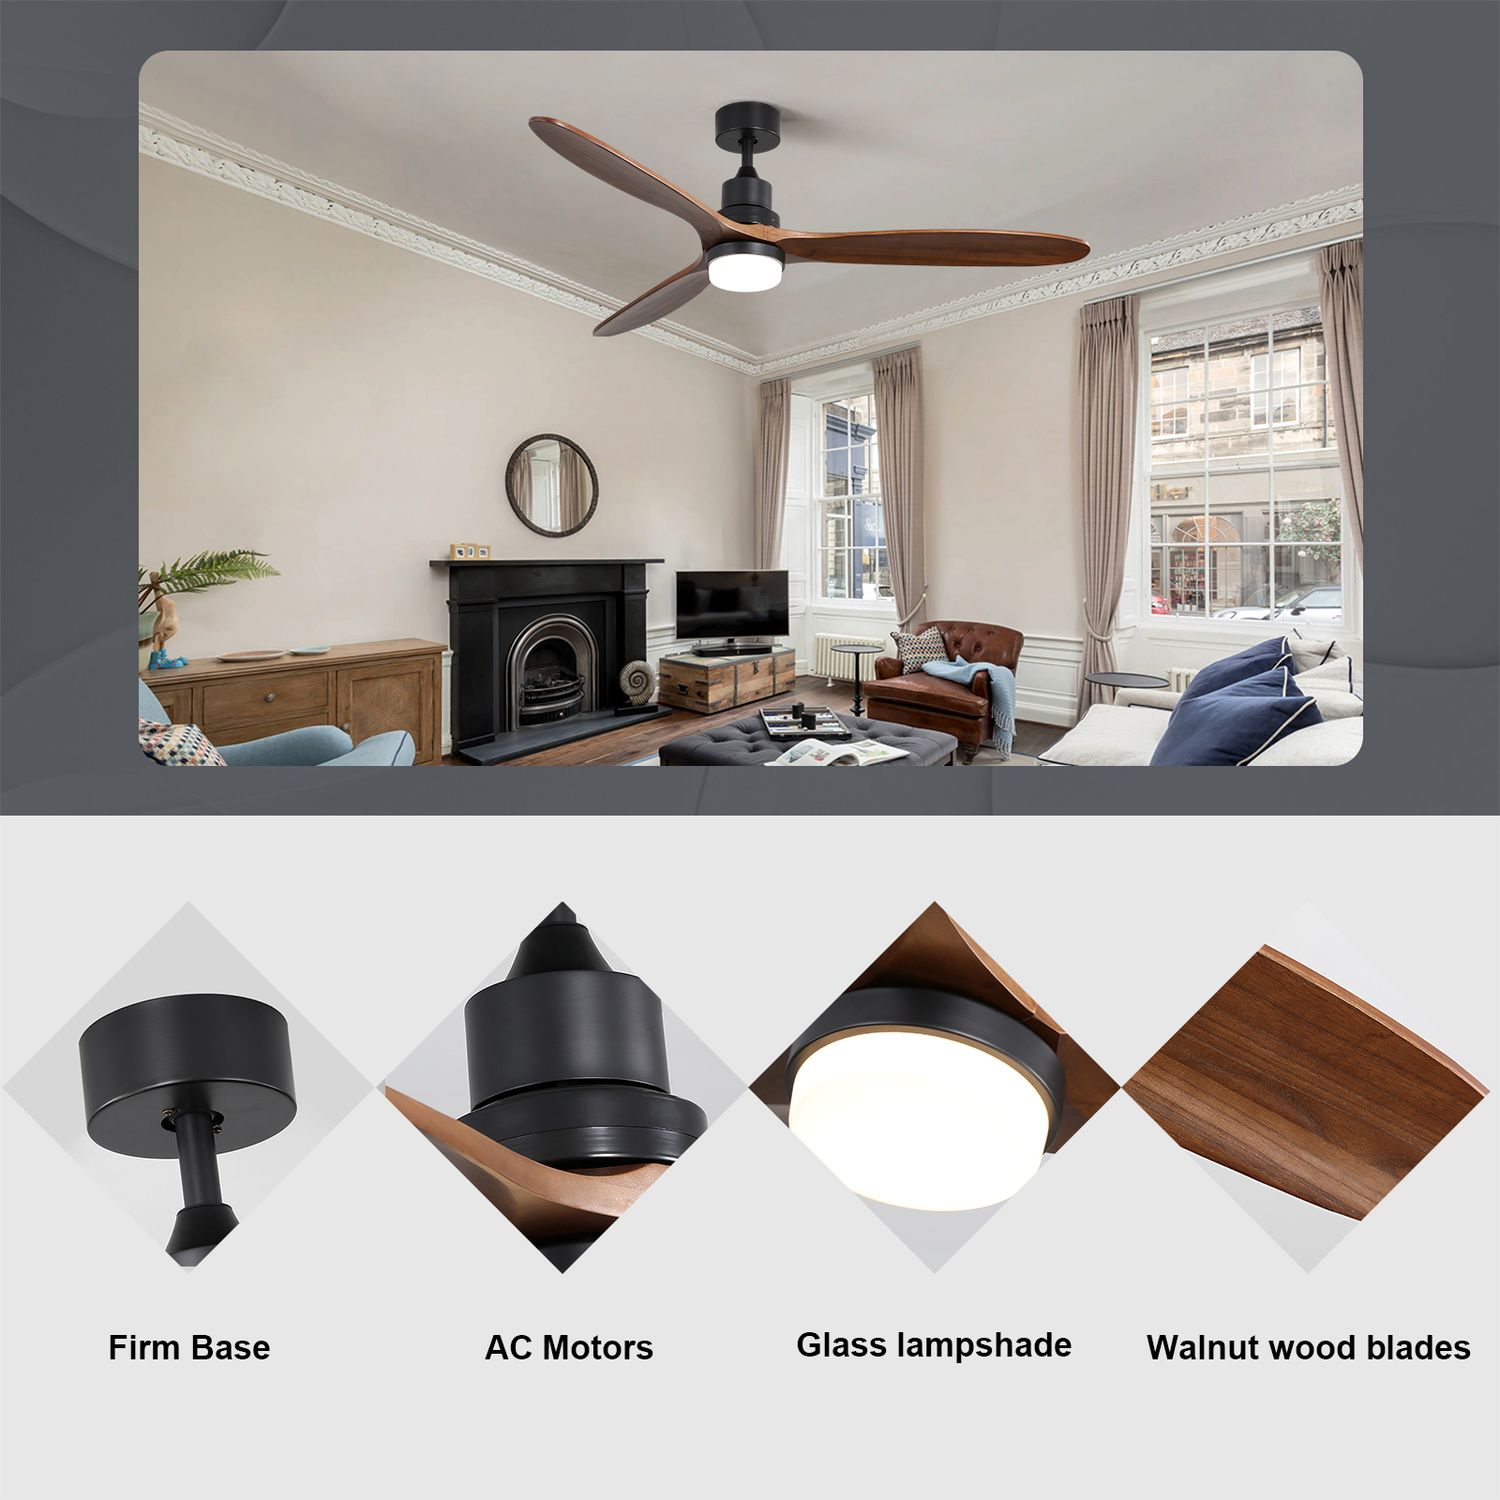 KBS 60 Inch Wood Design Reversible Ceiling Fan with Remote features in firm base, ac motors, glass lampshade, and walnut wood blades